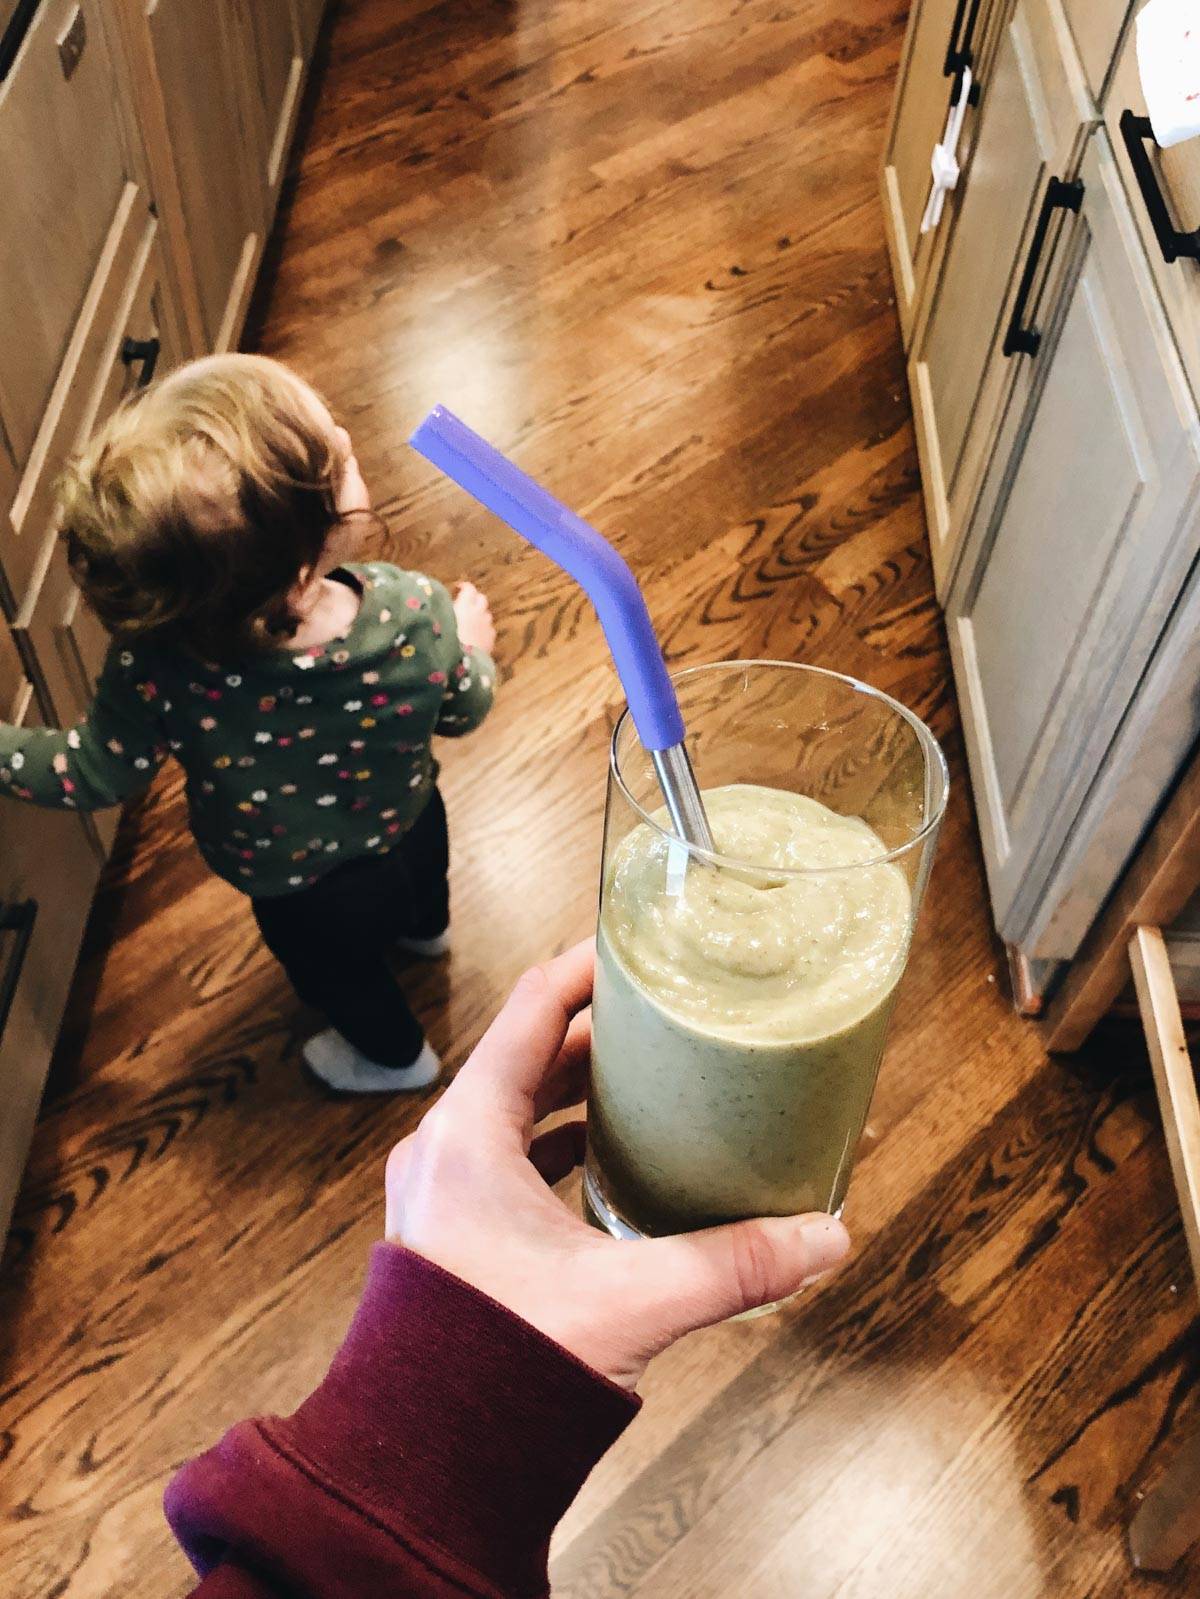 A kid is walking in the kitchen as a woman is holding a glass of smoothie with a straw in it.